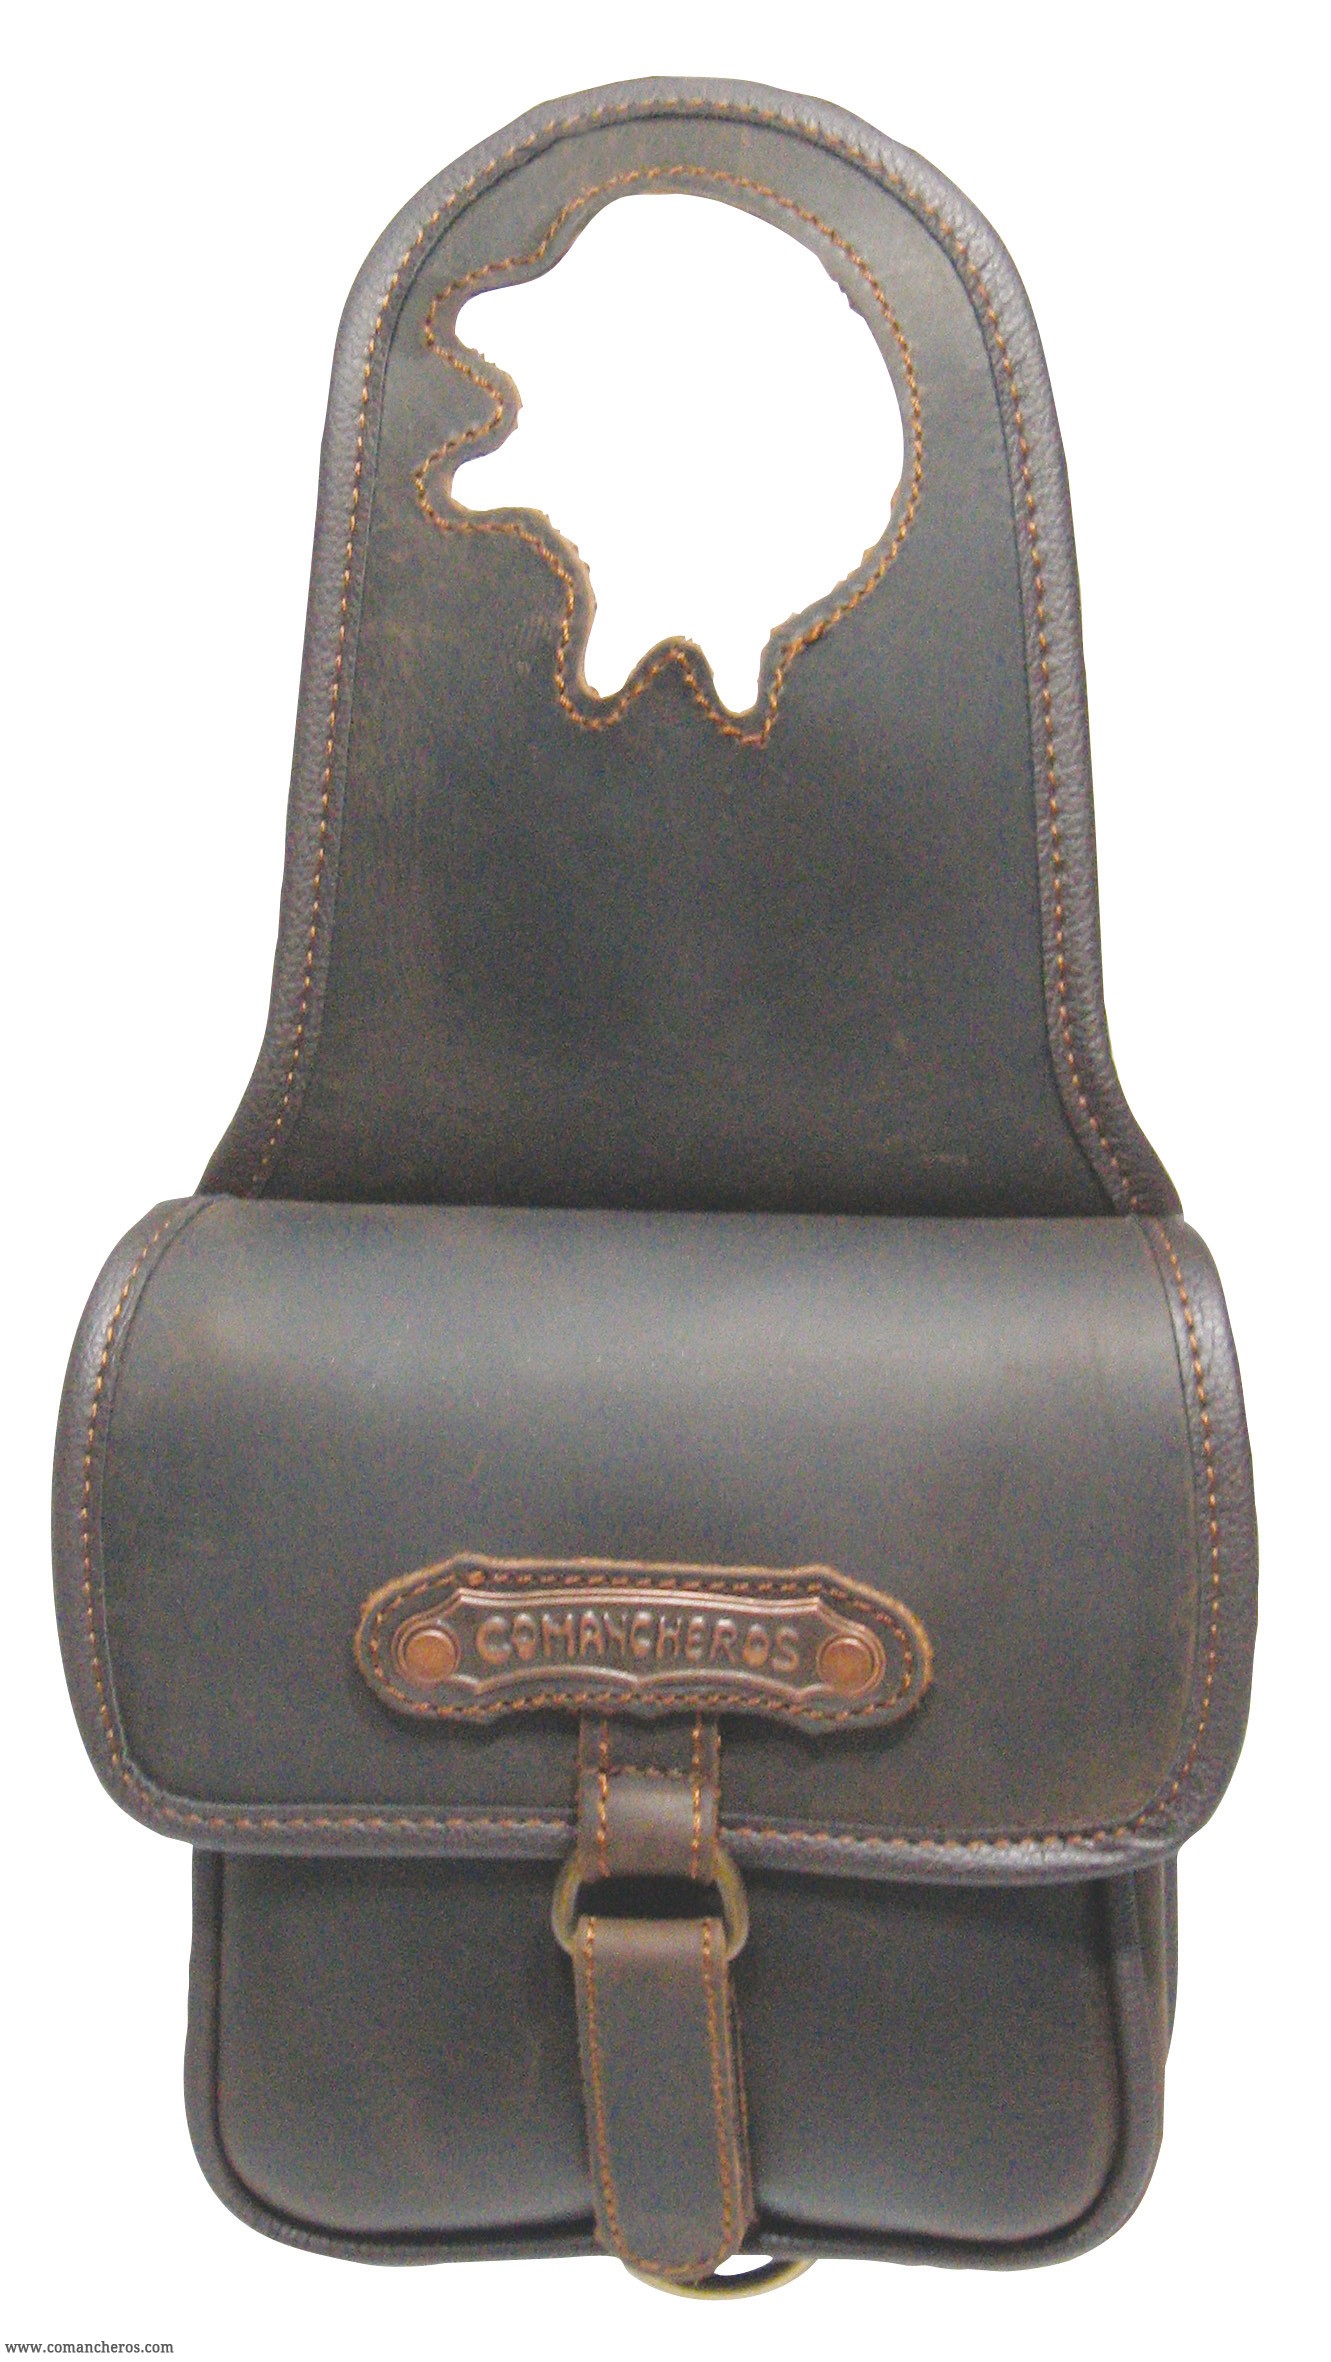 Very small Horne bag Comancheros for Western saddle, made from Leather. Made in Italy